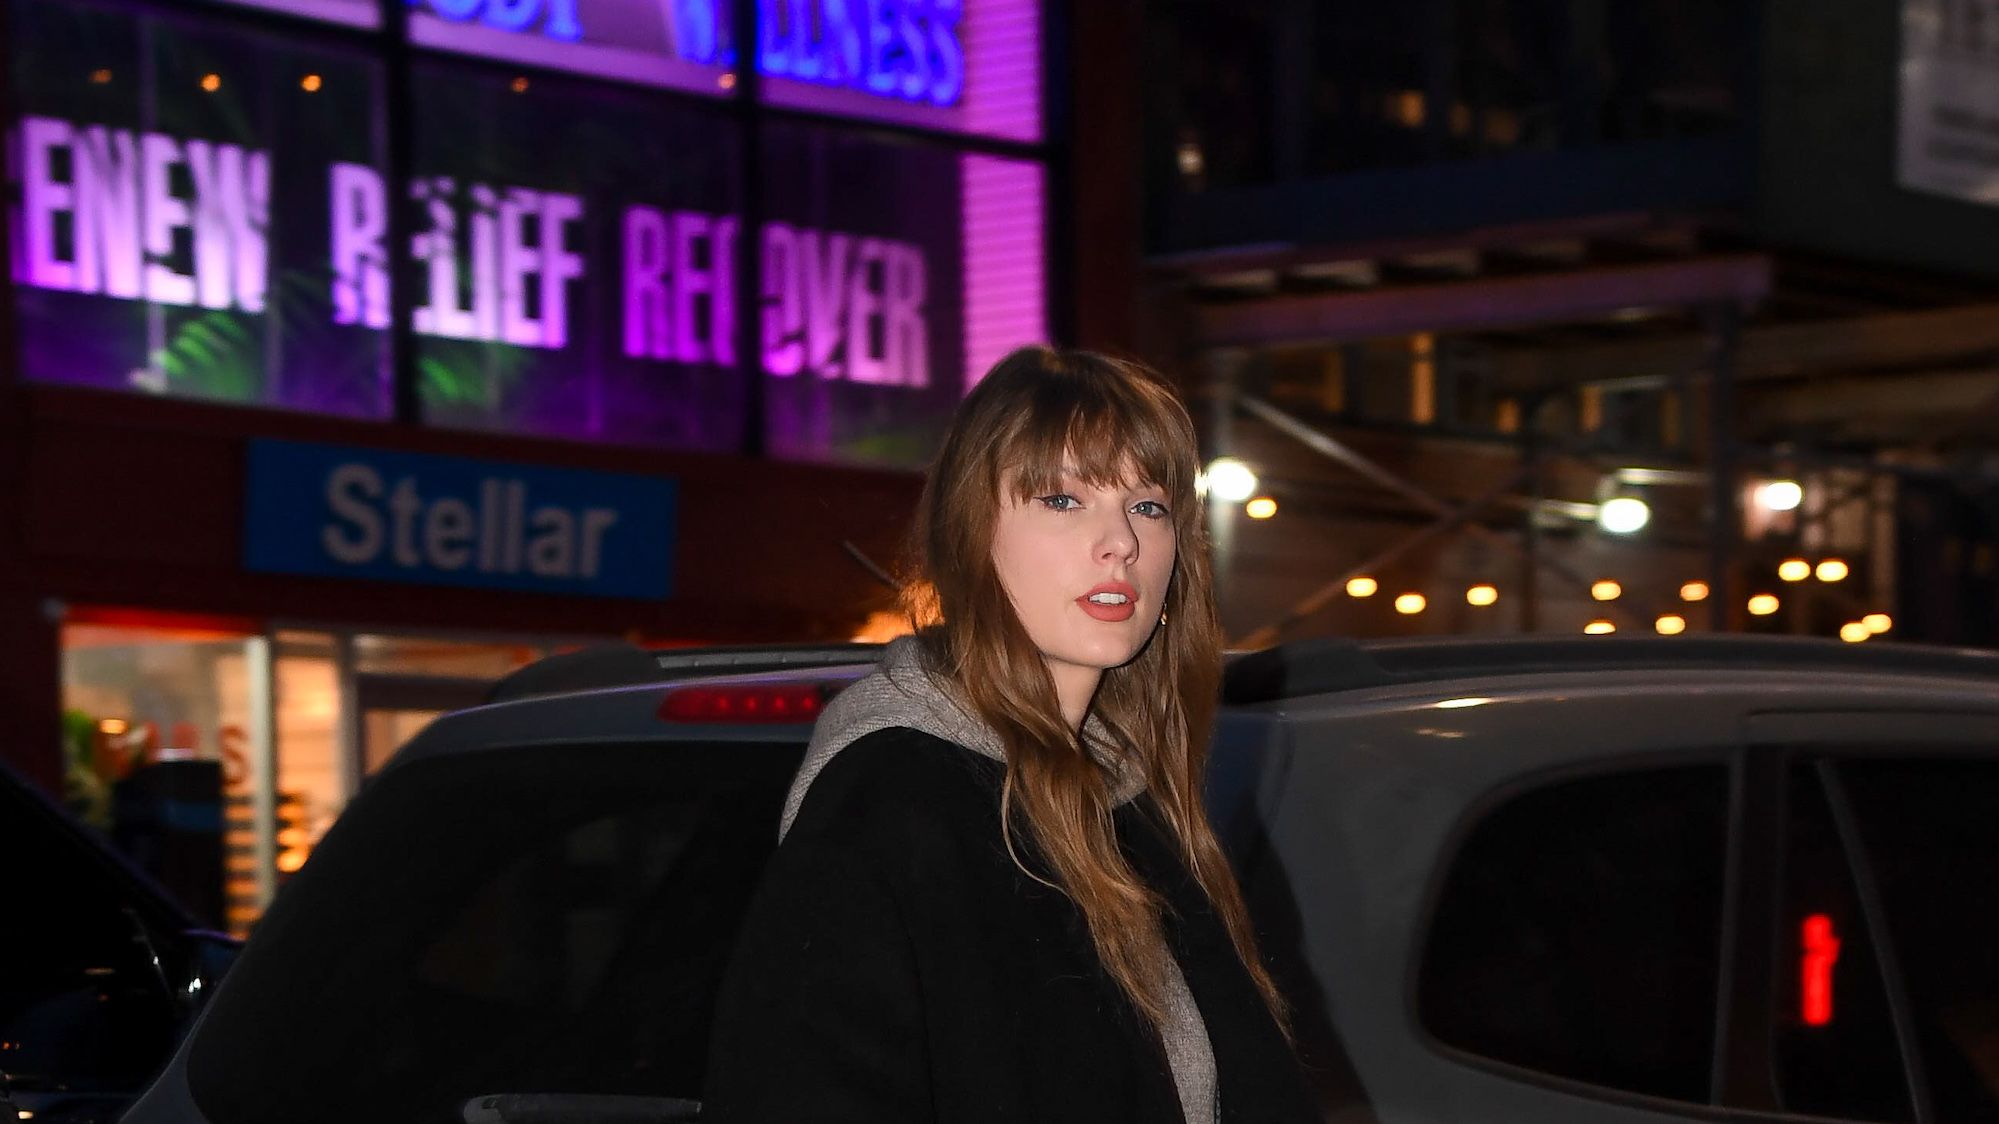 Taylor Swift: Singer Steps Out In Black Bra In New York City